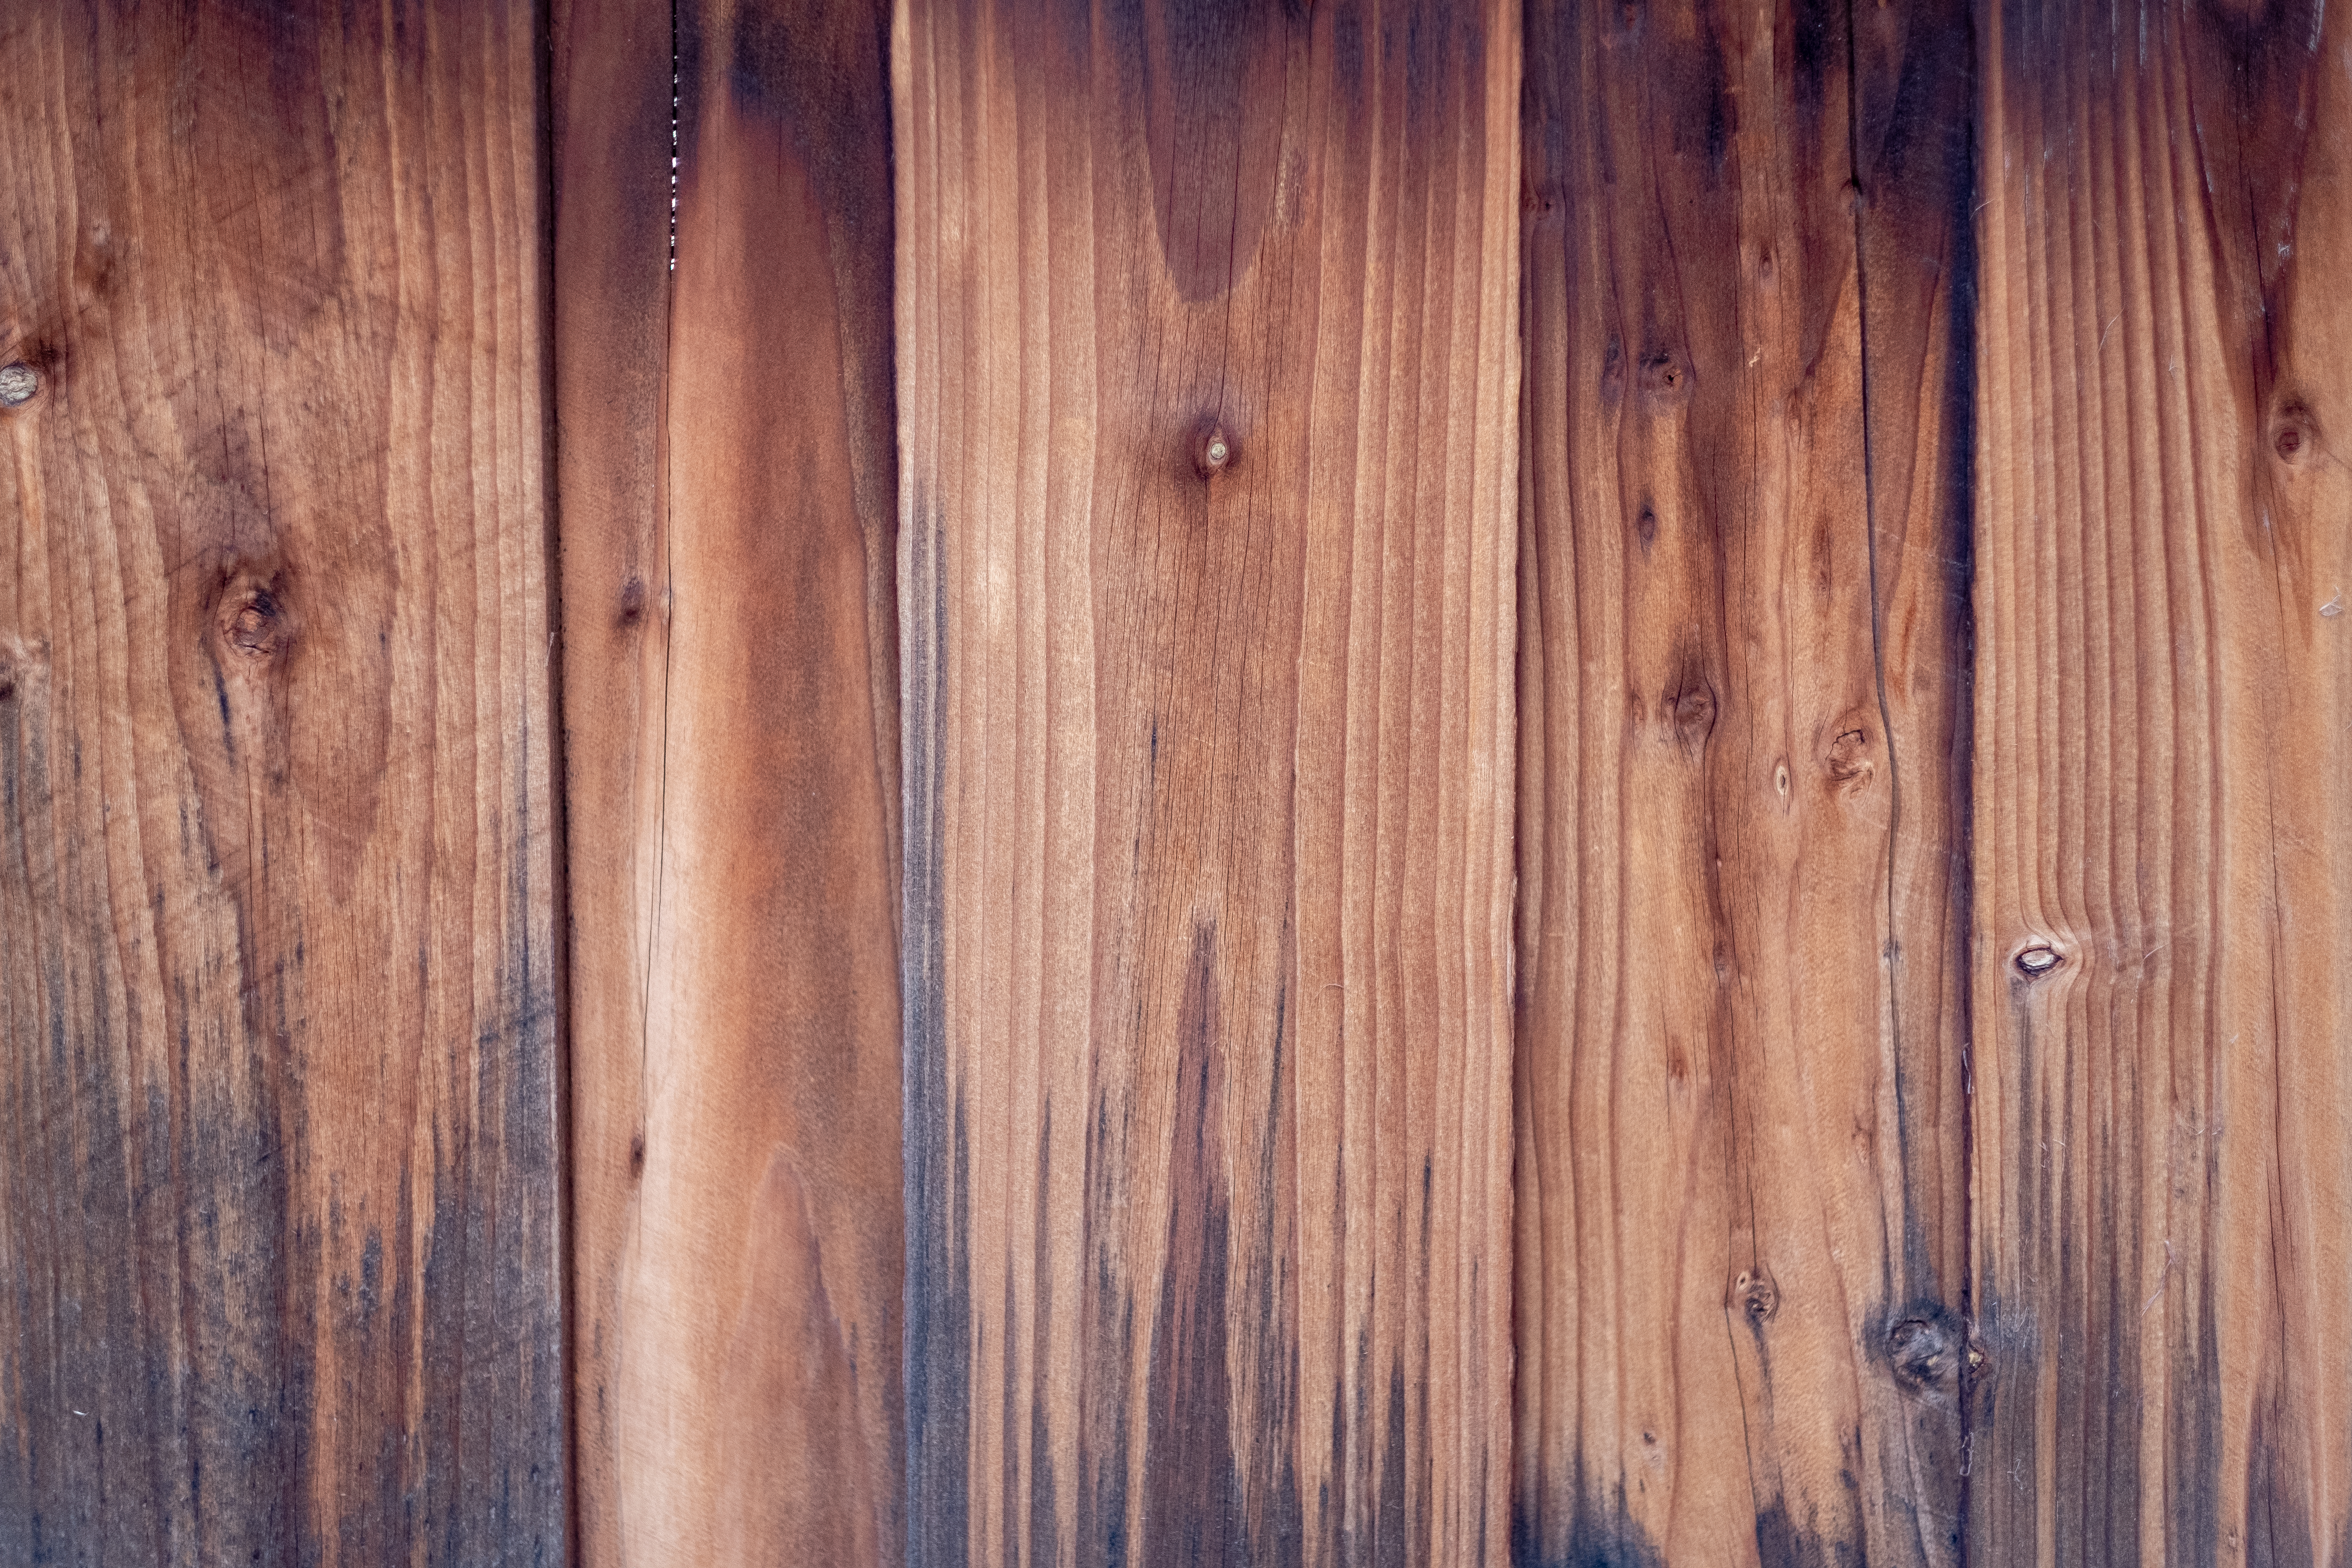 1080p pic tree, wood, textures, texture